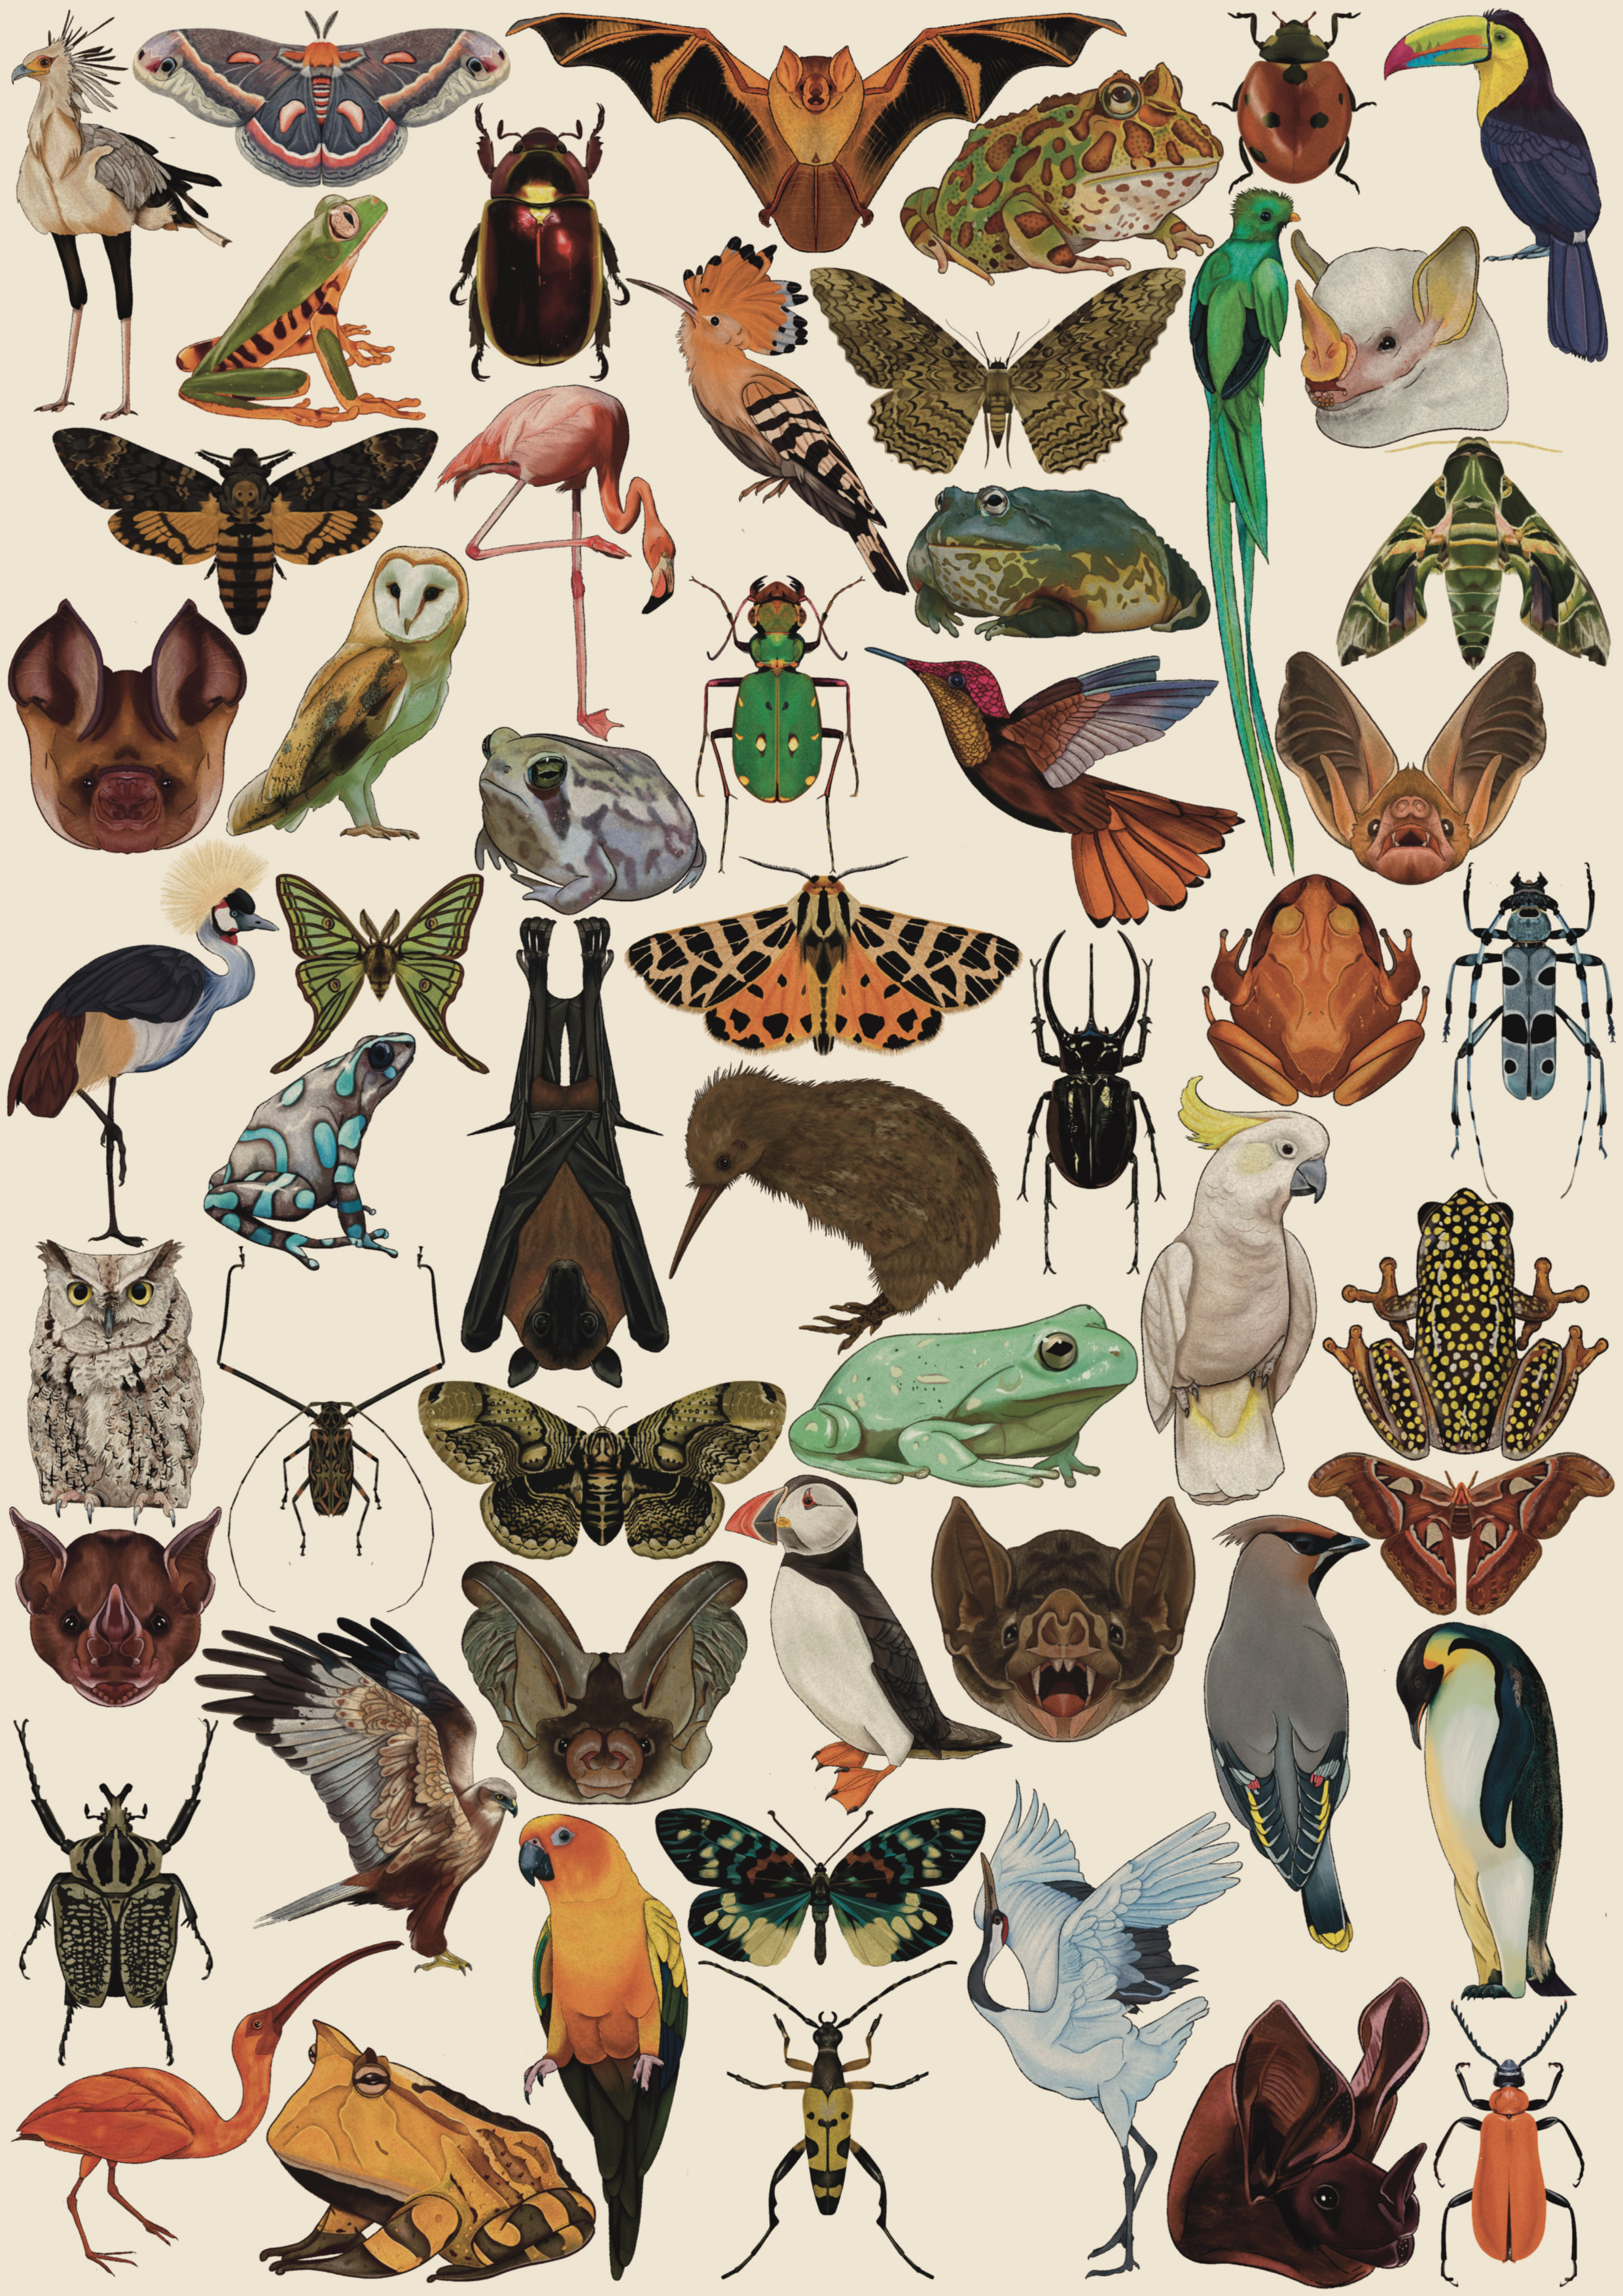 BA Illustration work by Chloe Smith showing all Fifty-four illustrations including various frogs, bats, moths, beetles and birds.